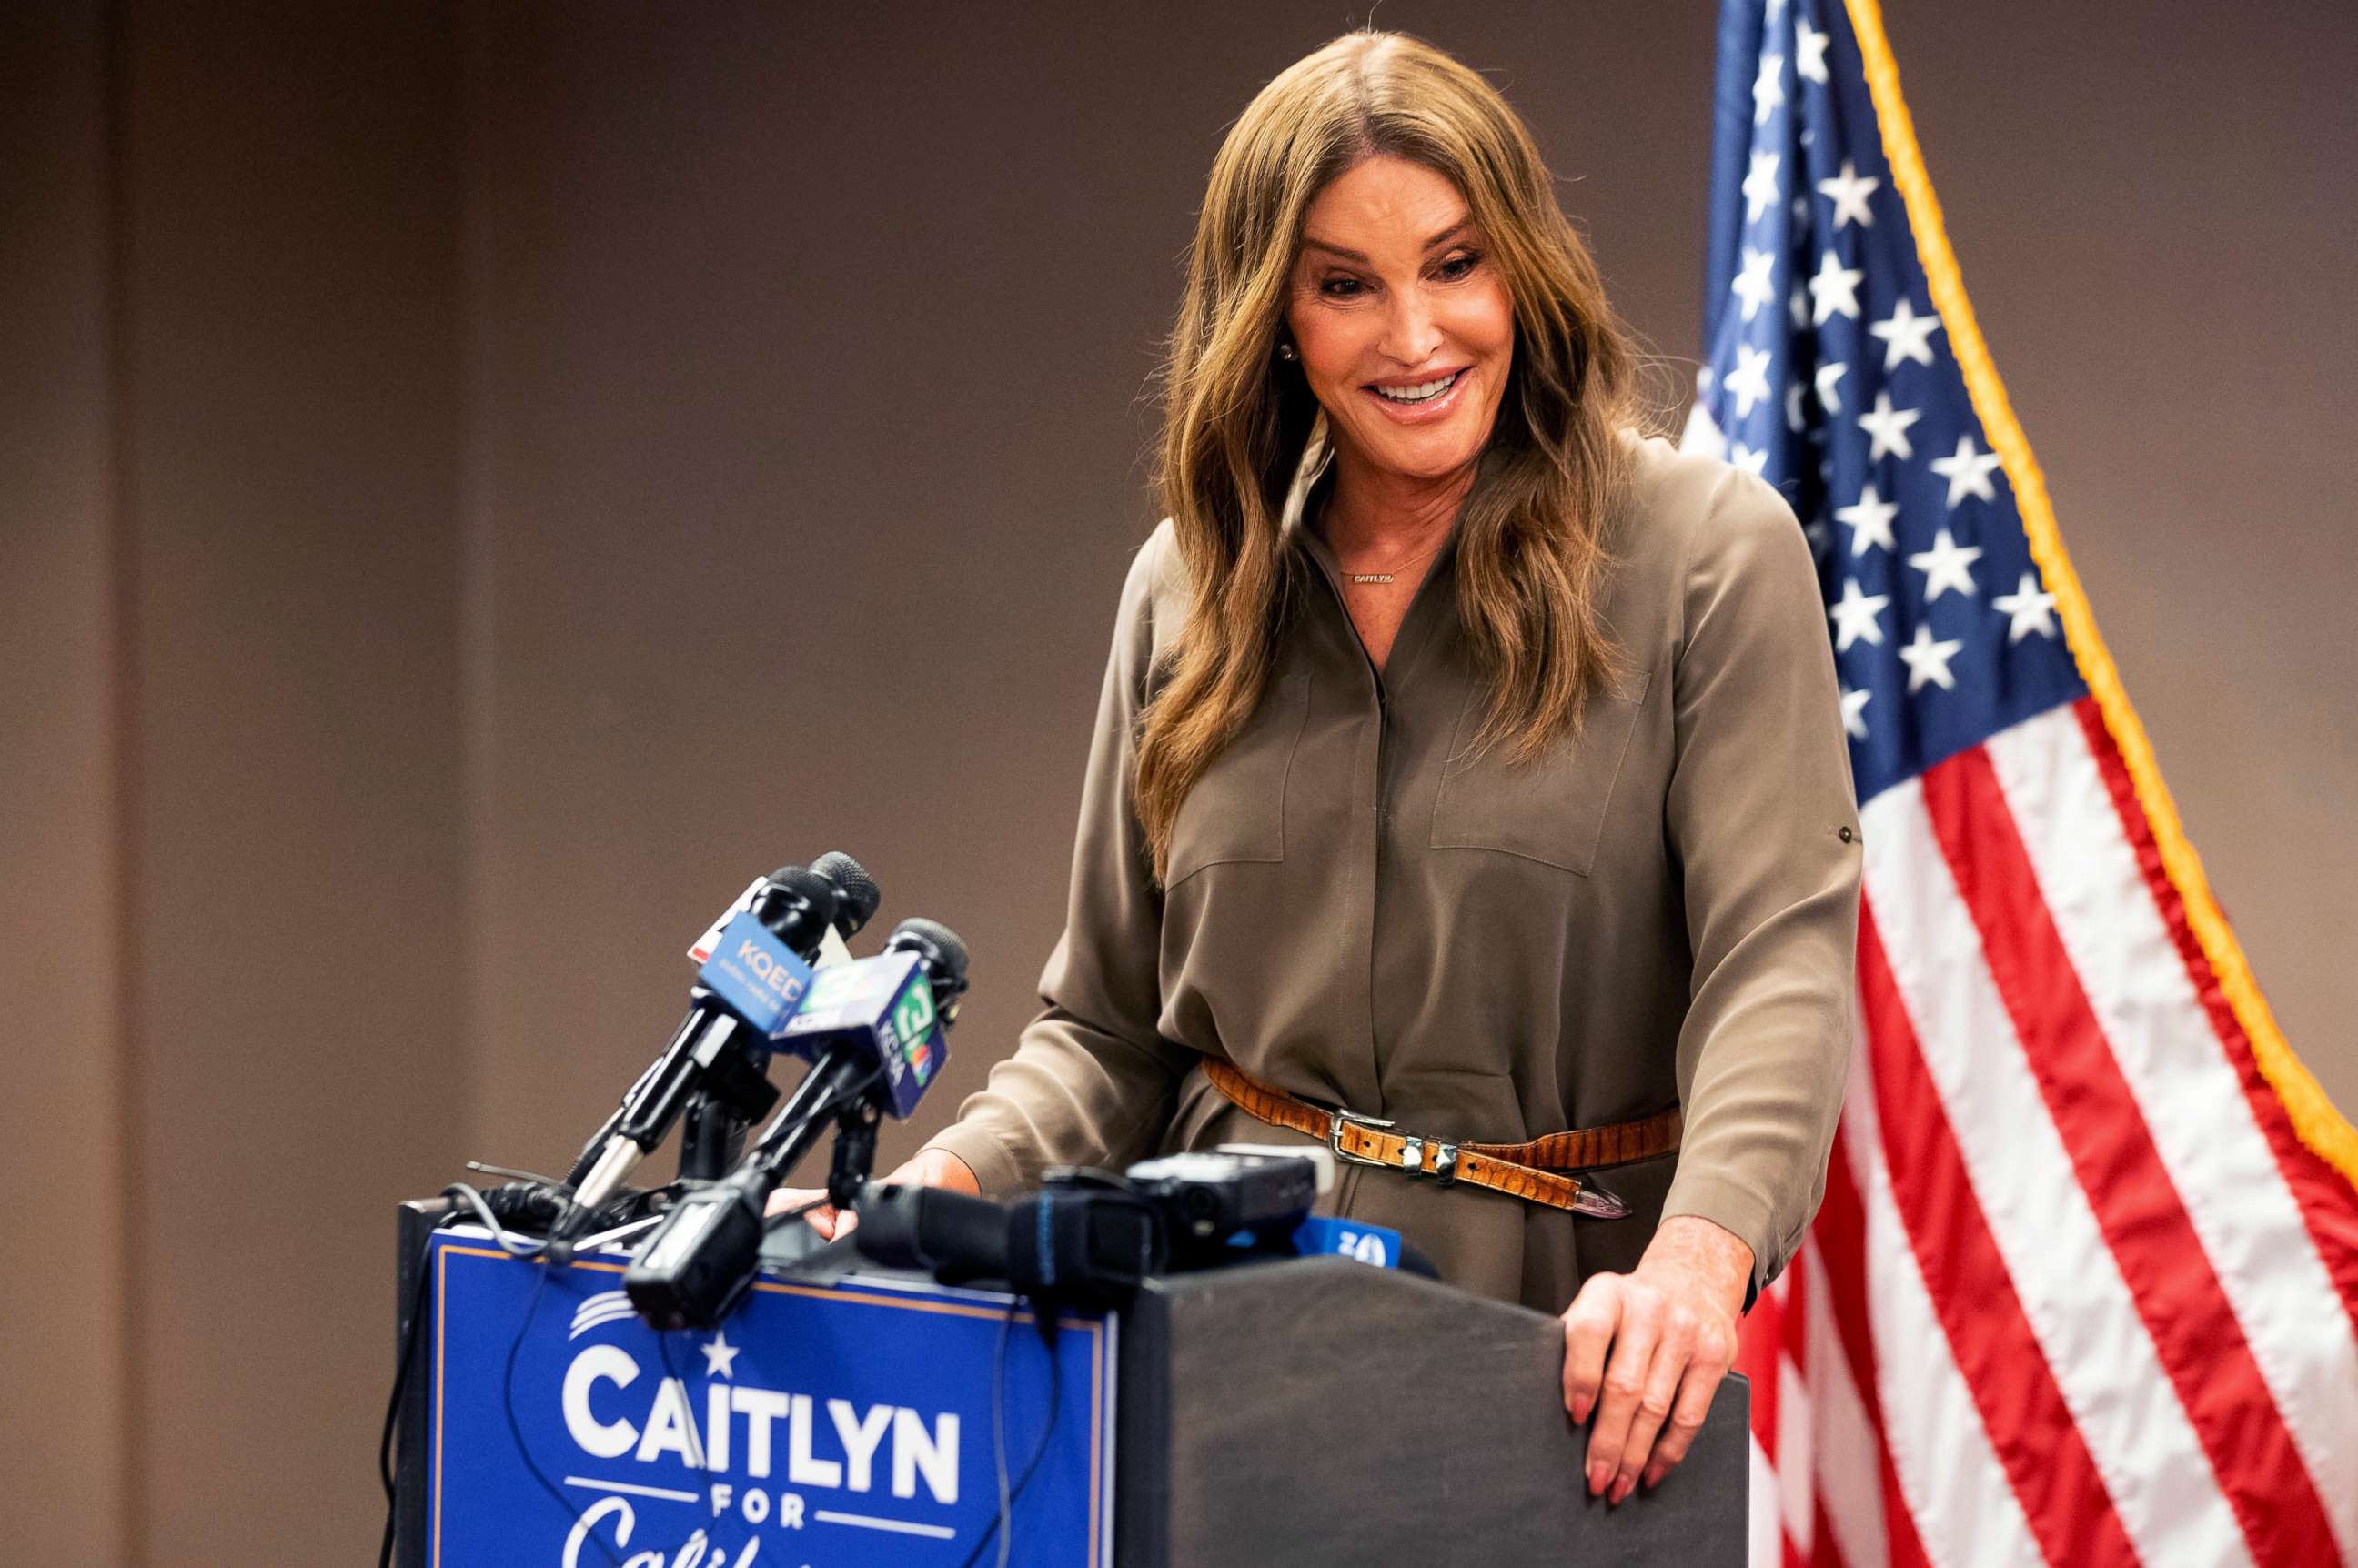 PHOTO: Caitlyn Jenner, a Republican candidate for California governor, speaks during a news conference in Sacramento, Calif., July 9, 2021.